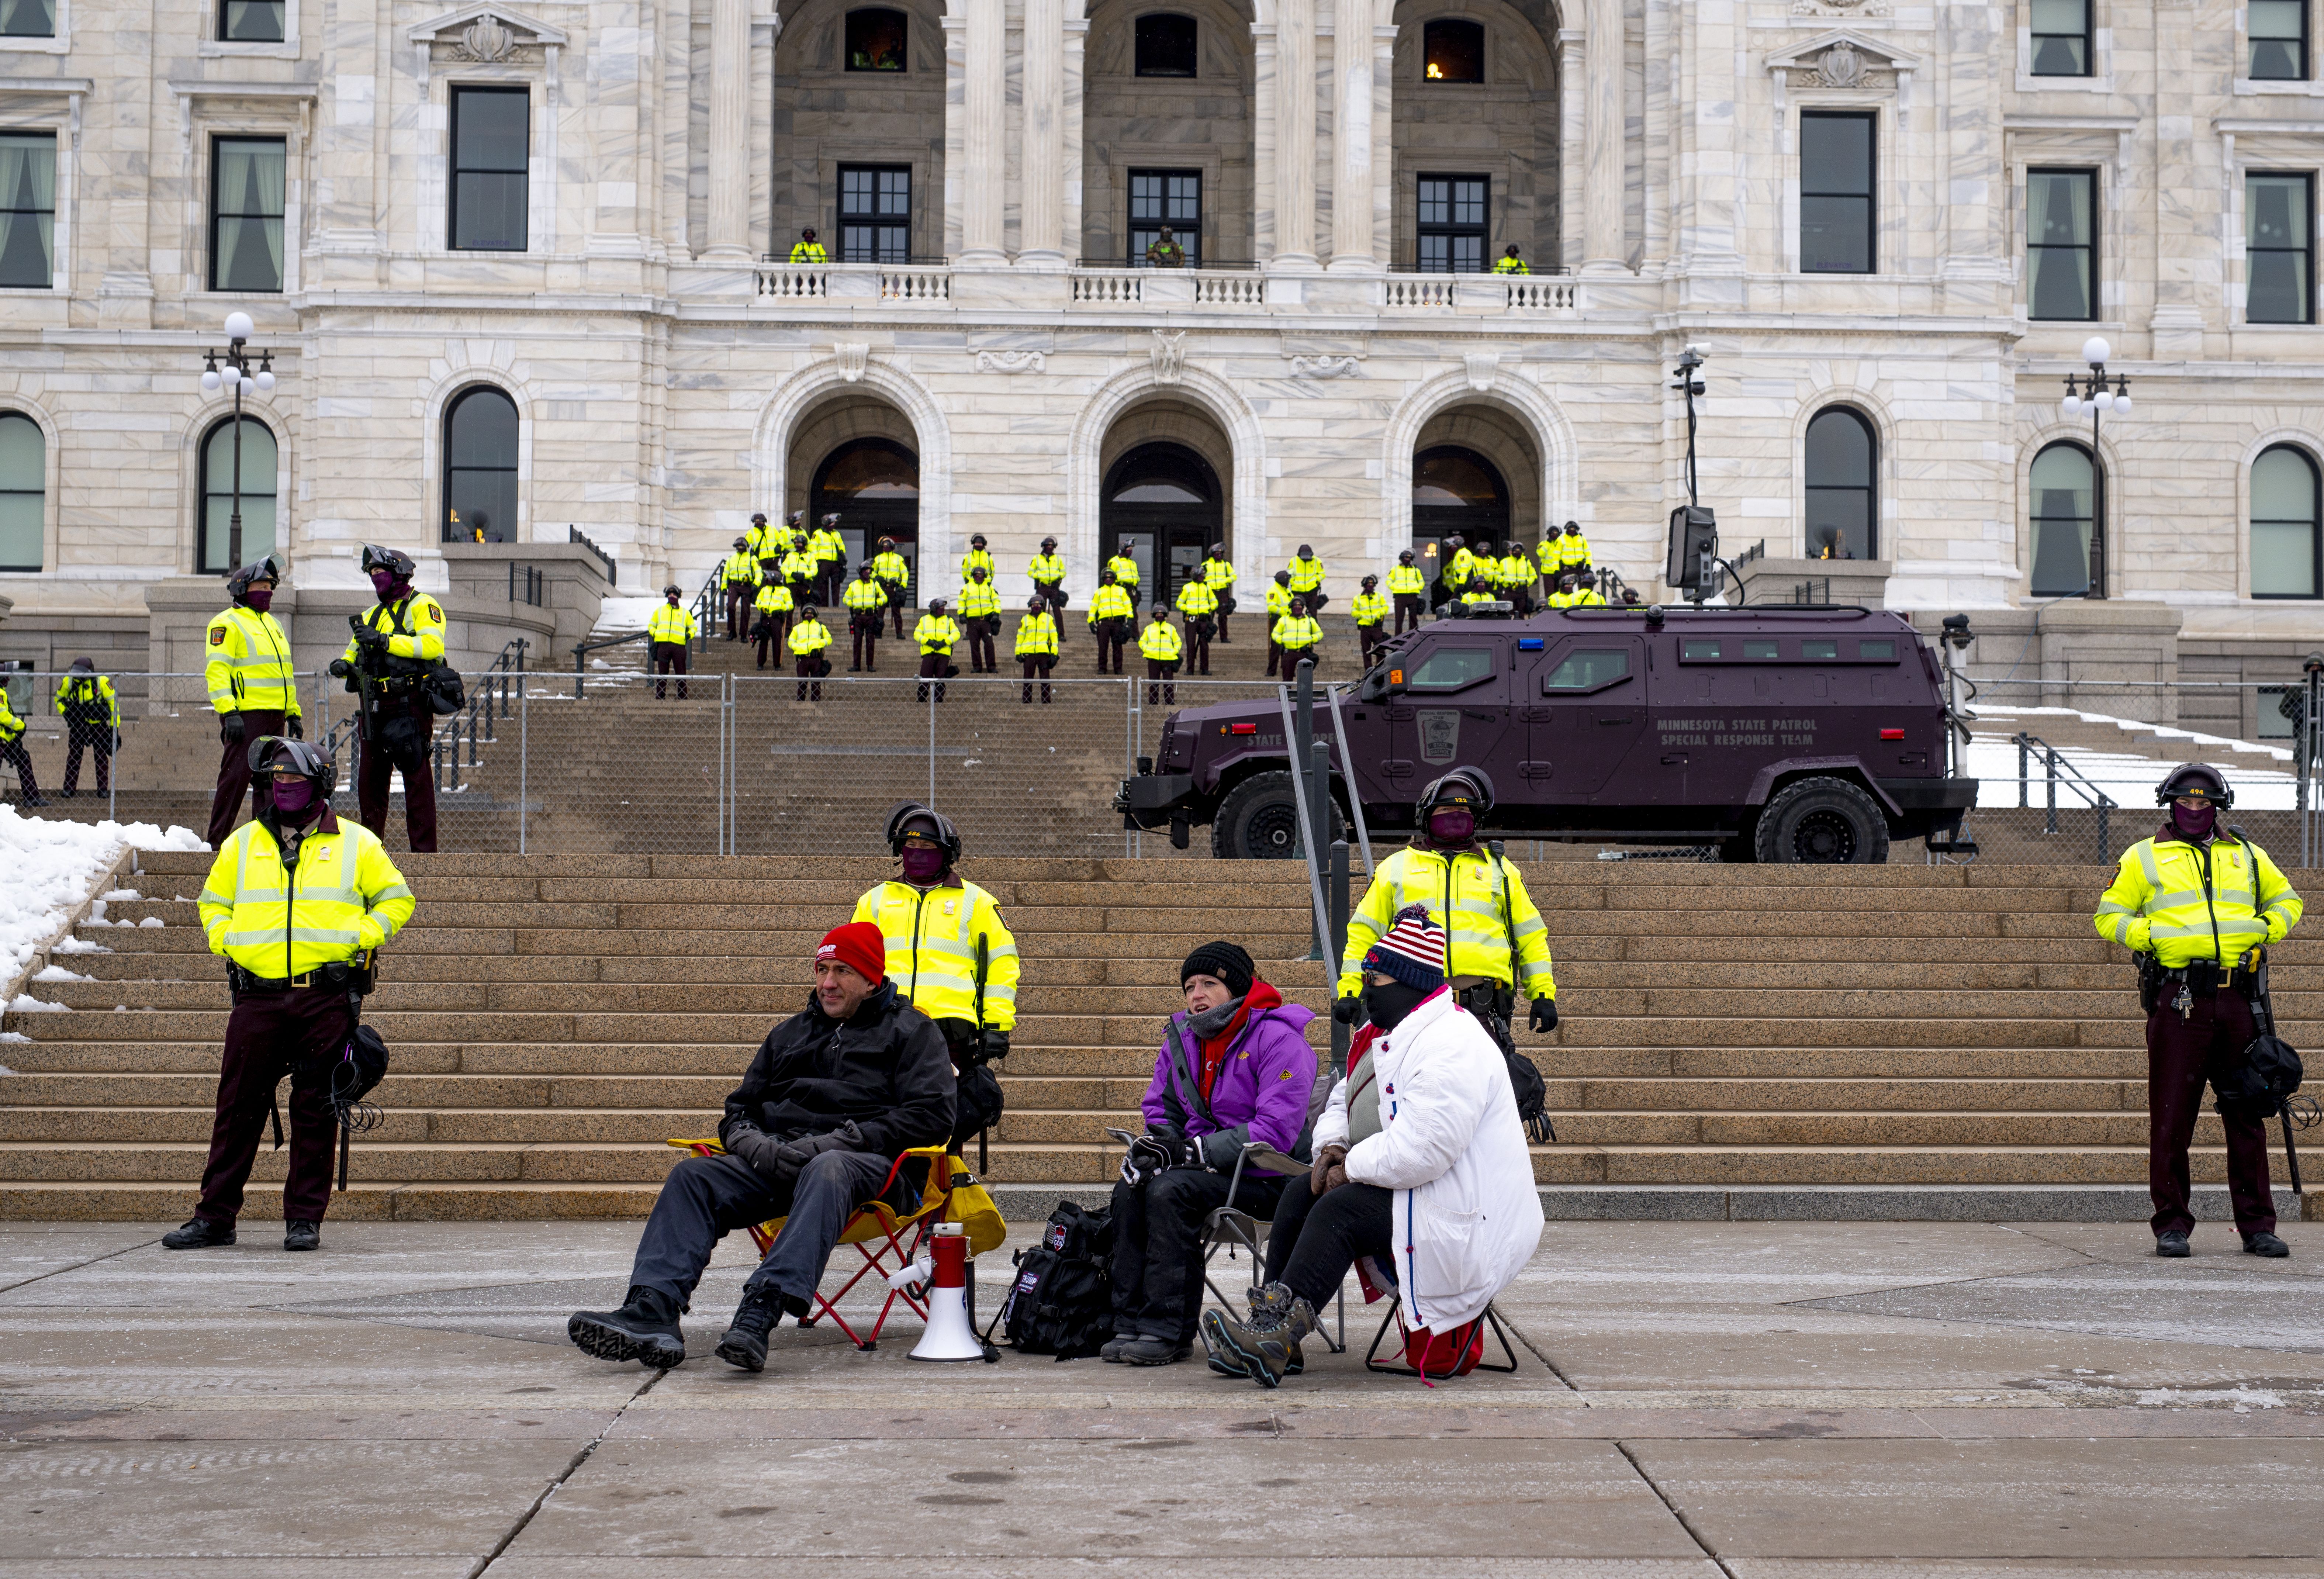 Minnesota State Patrol stand guard as a small group of people who support President Donald Trump sit outside the Minnesota Capitol building on January 17, 2021 in St Paul